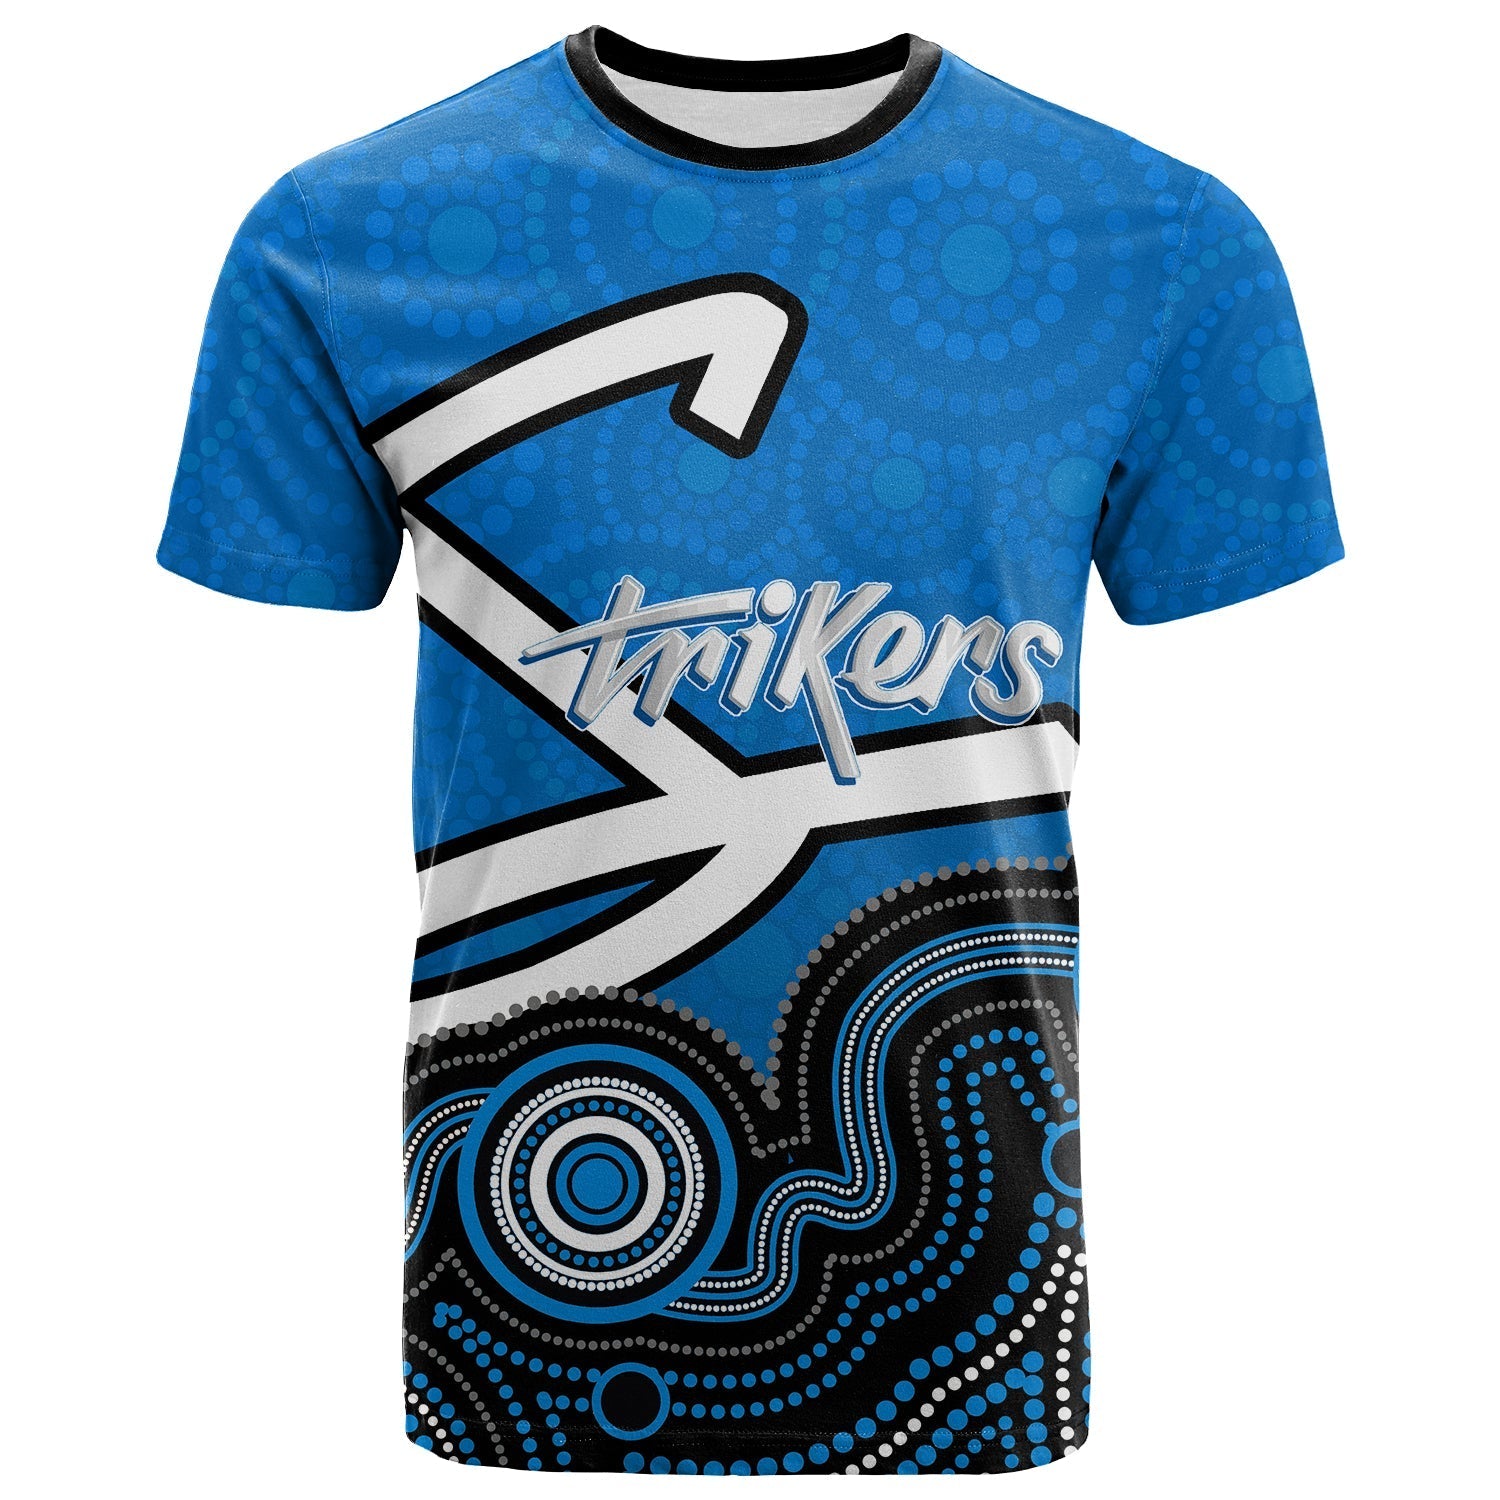 custom-personalised-and-number-adelaide-strikers-t-shirt-cricket-aboriginal-style-lt6